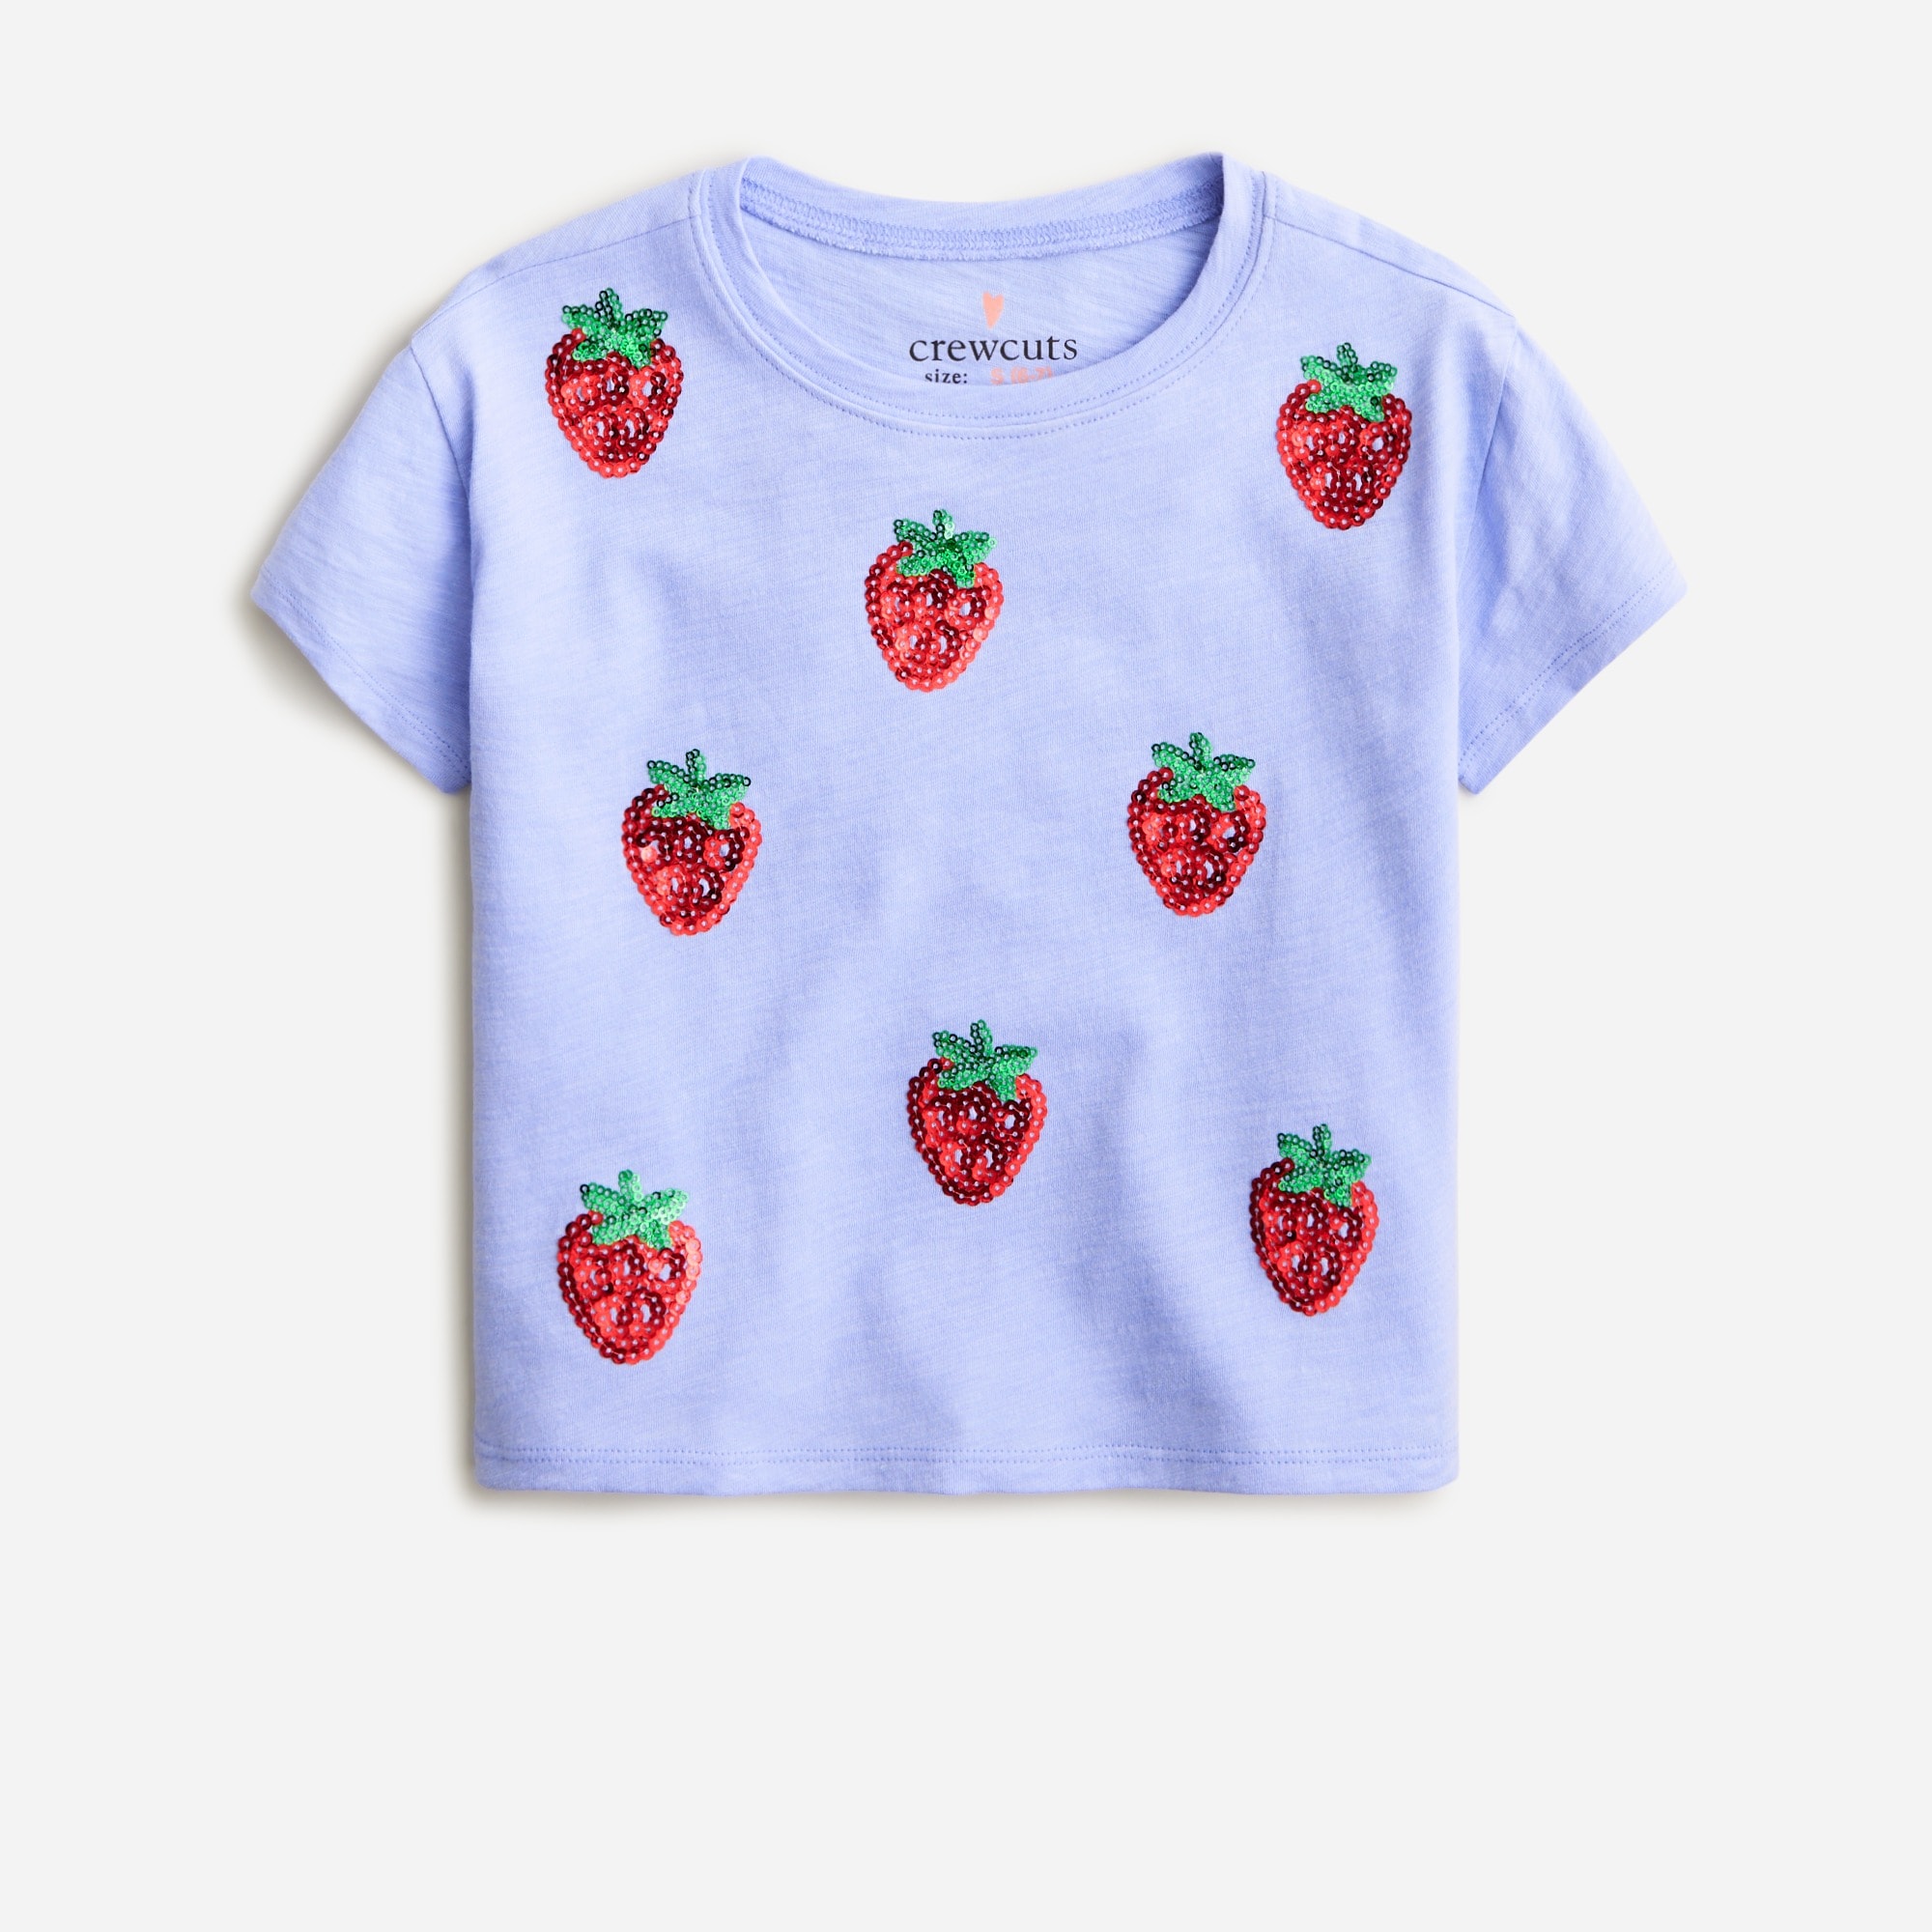  Girls' cropped sequin strawberry T-shirt